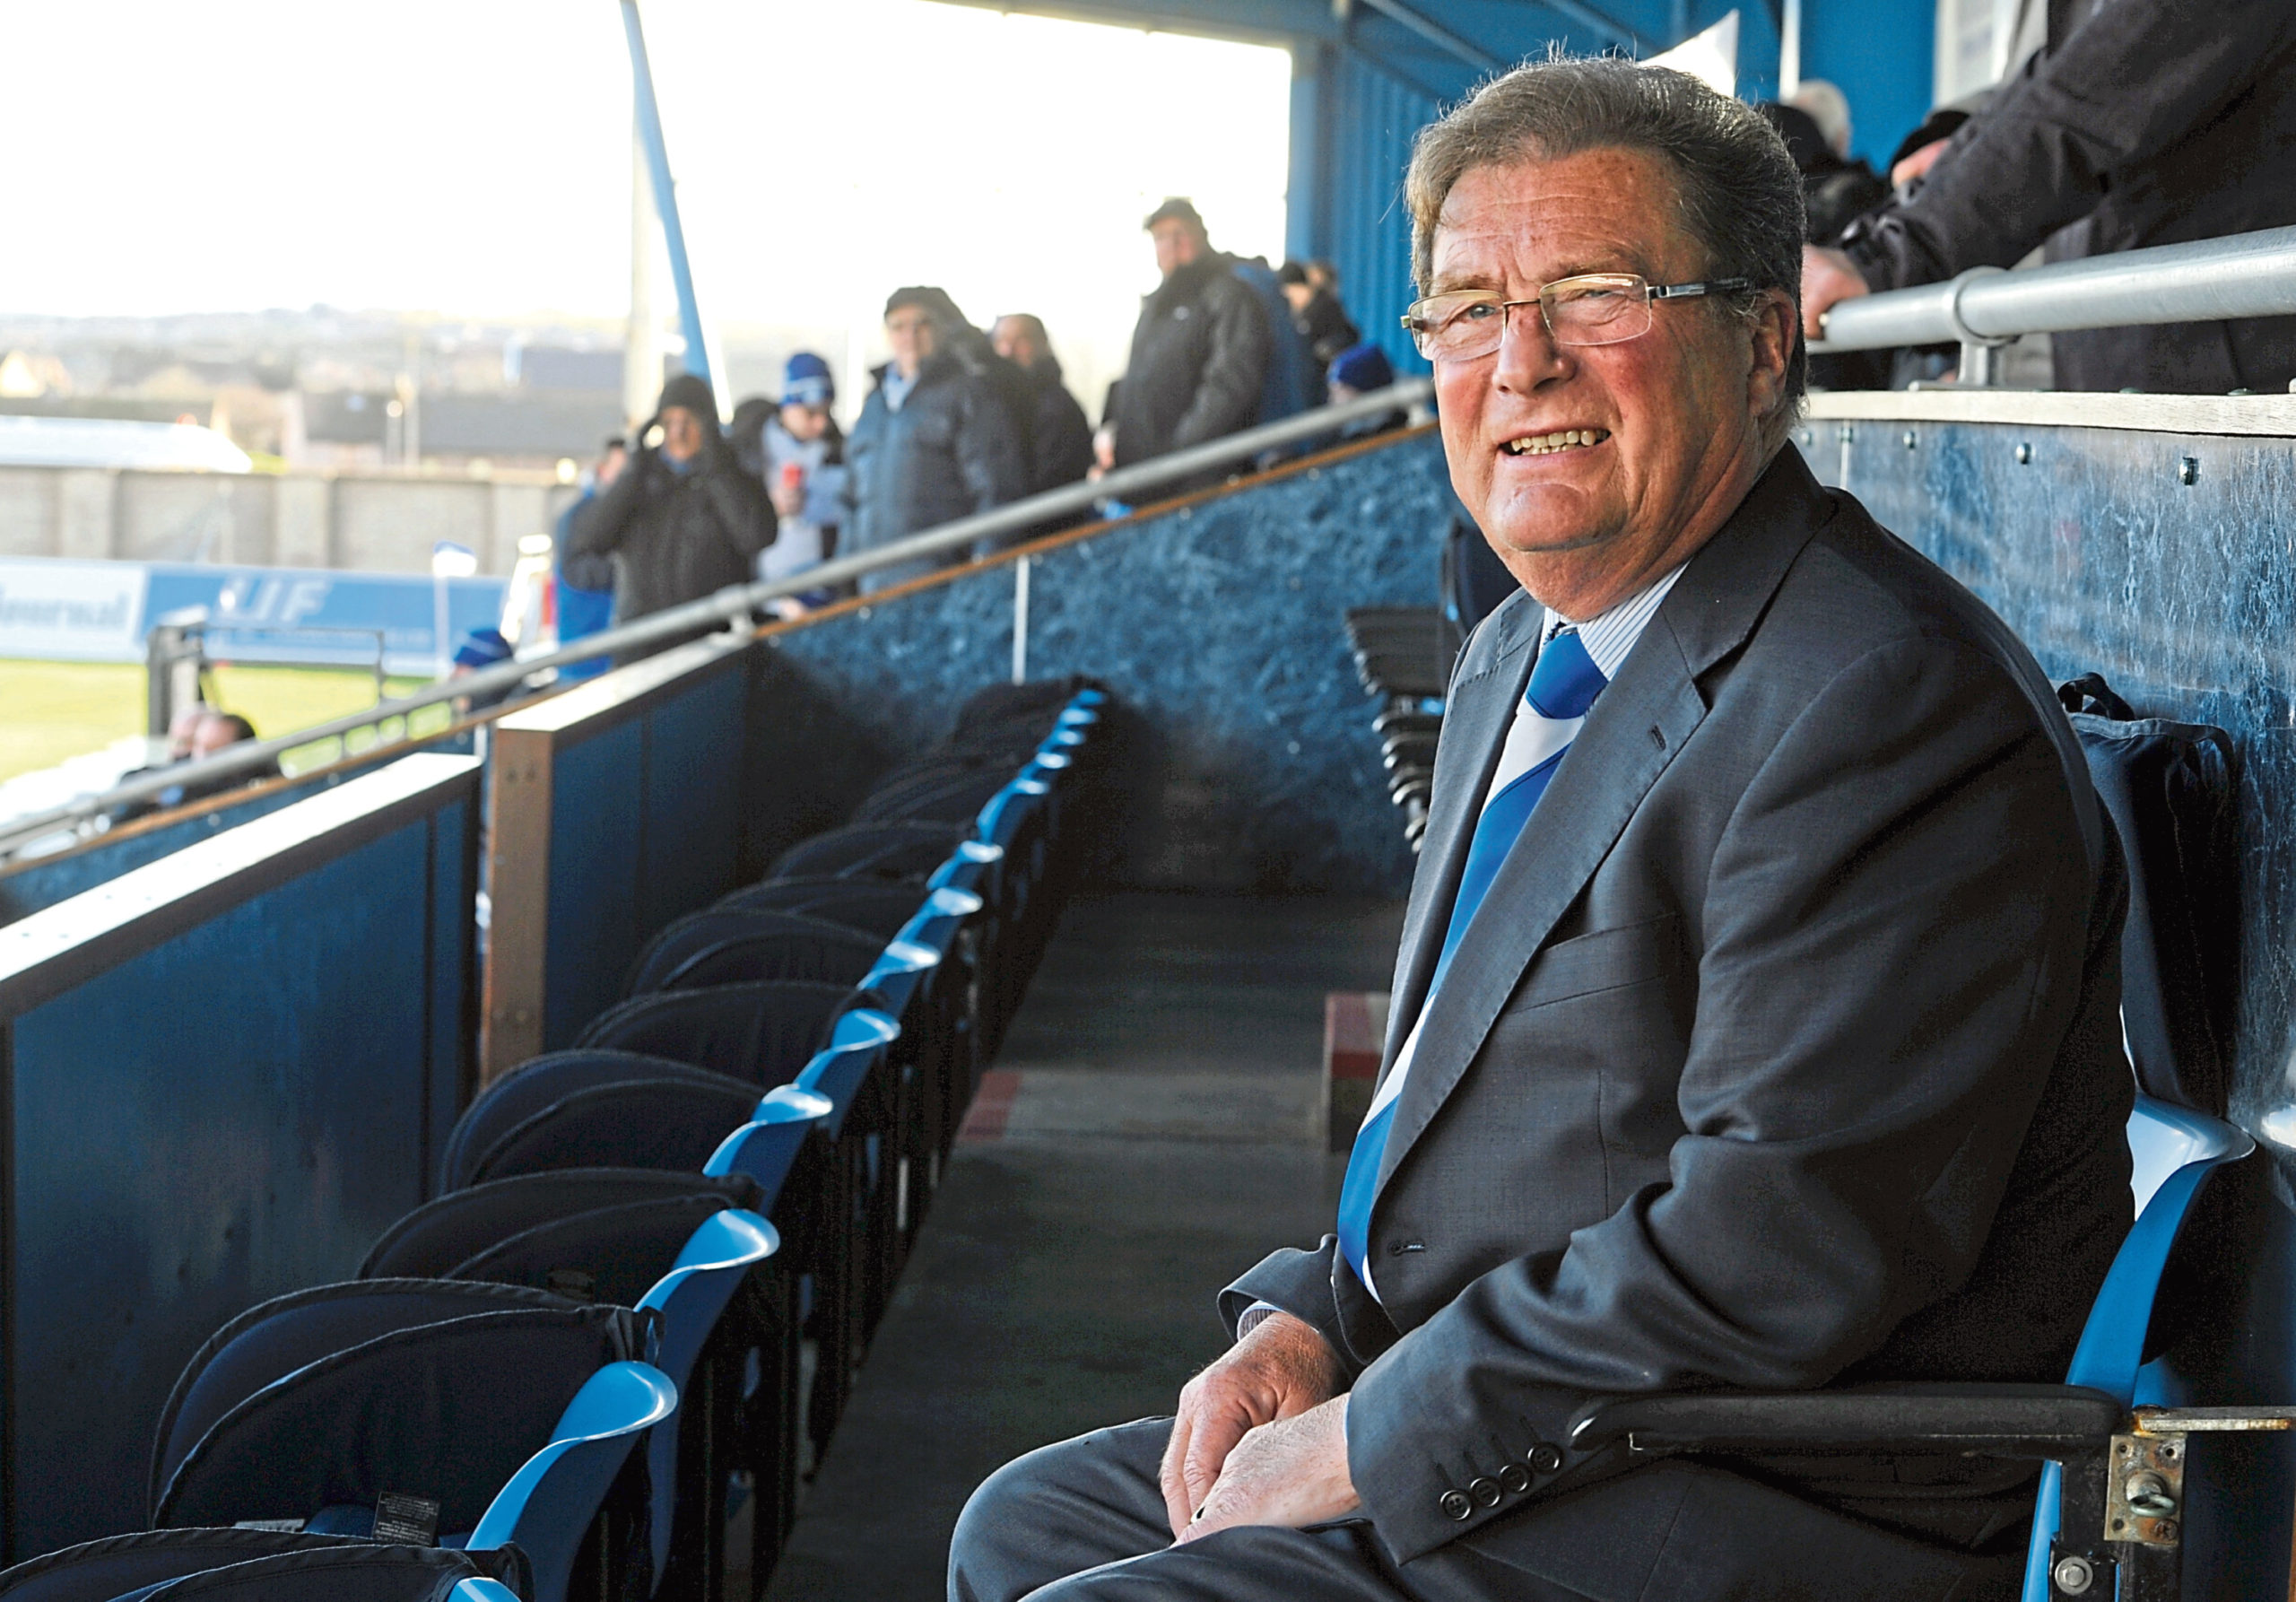 Peterhead FC chairman Rodger Morrison.
Picture by Darrell Benns